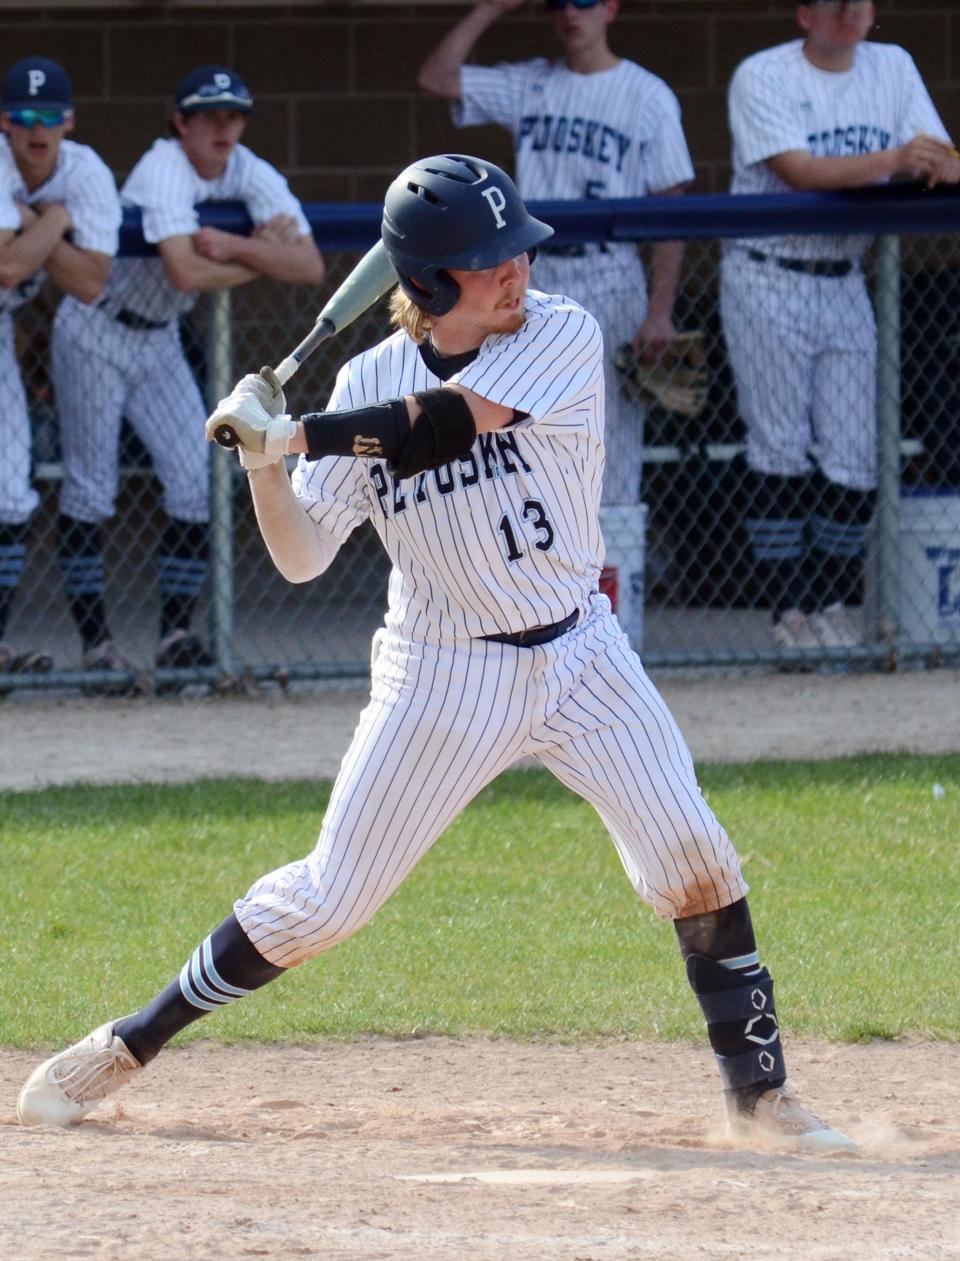 Stephen McGeehan's big bat returns to the Petoskey lineup again this season, along with his strong glove behind the plate.